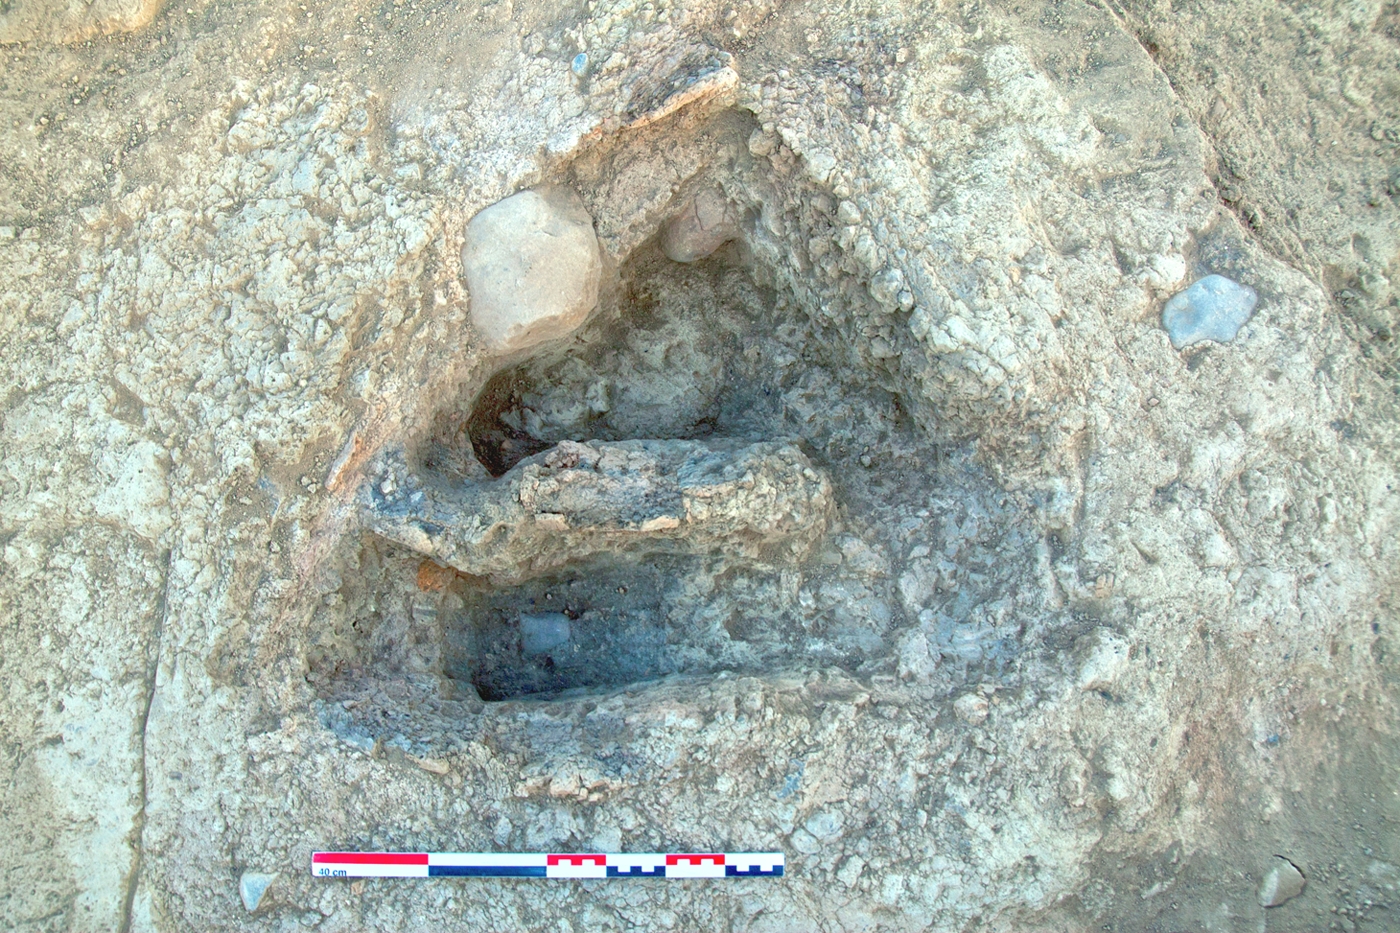 A small, double-chambered oven or hearth, FI 37. It was situated in a narrow corridor between buildings.